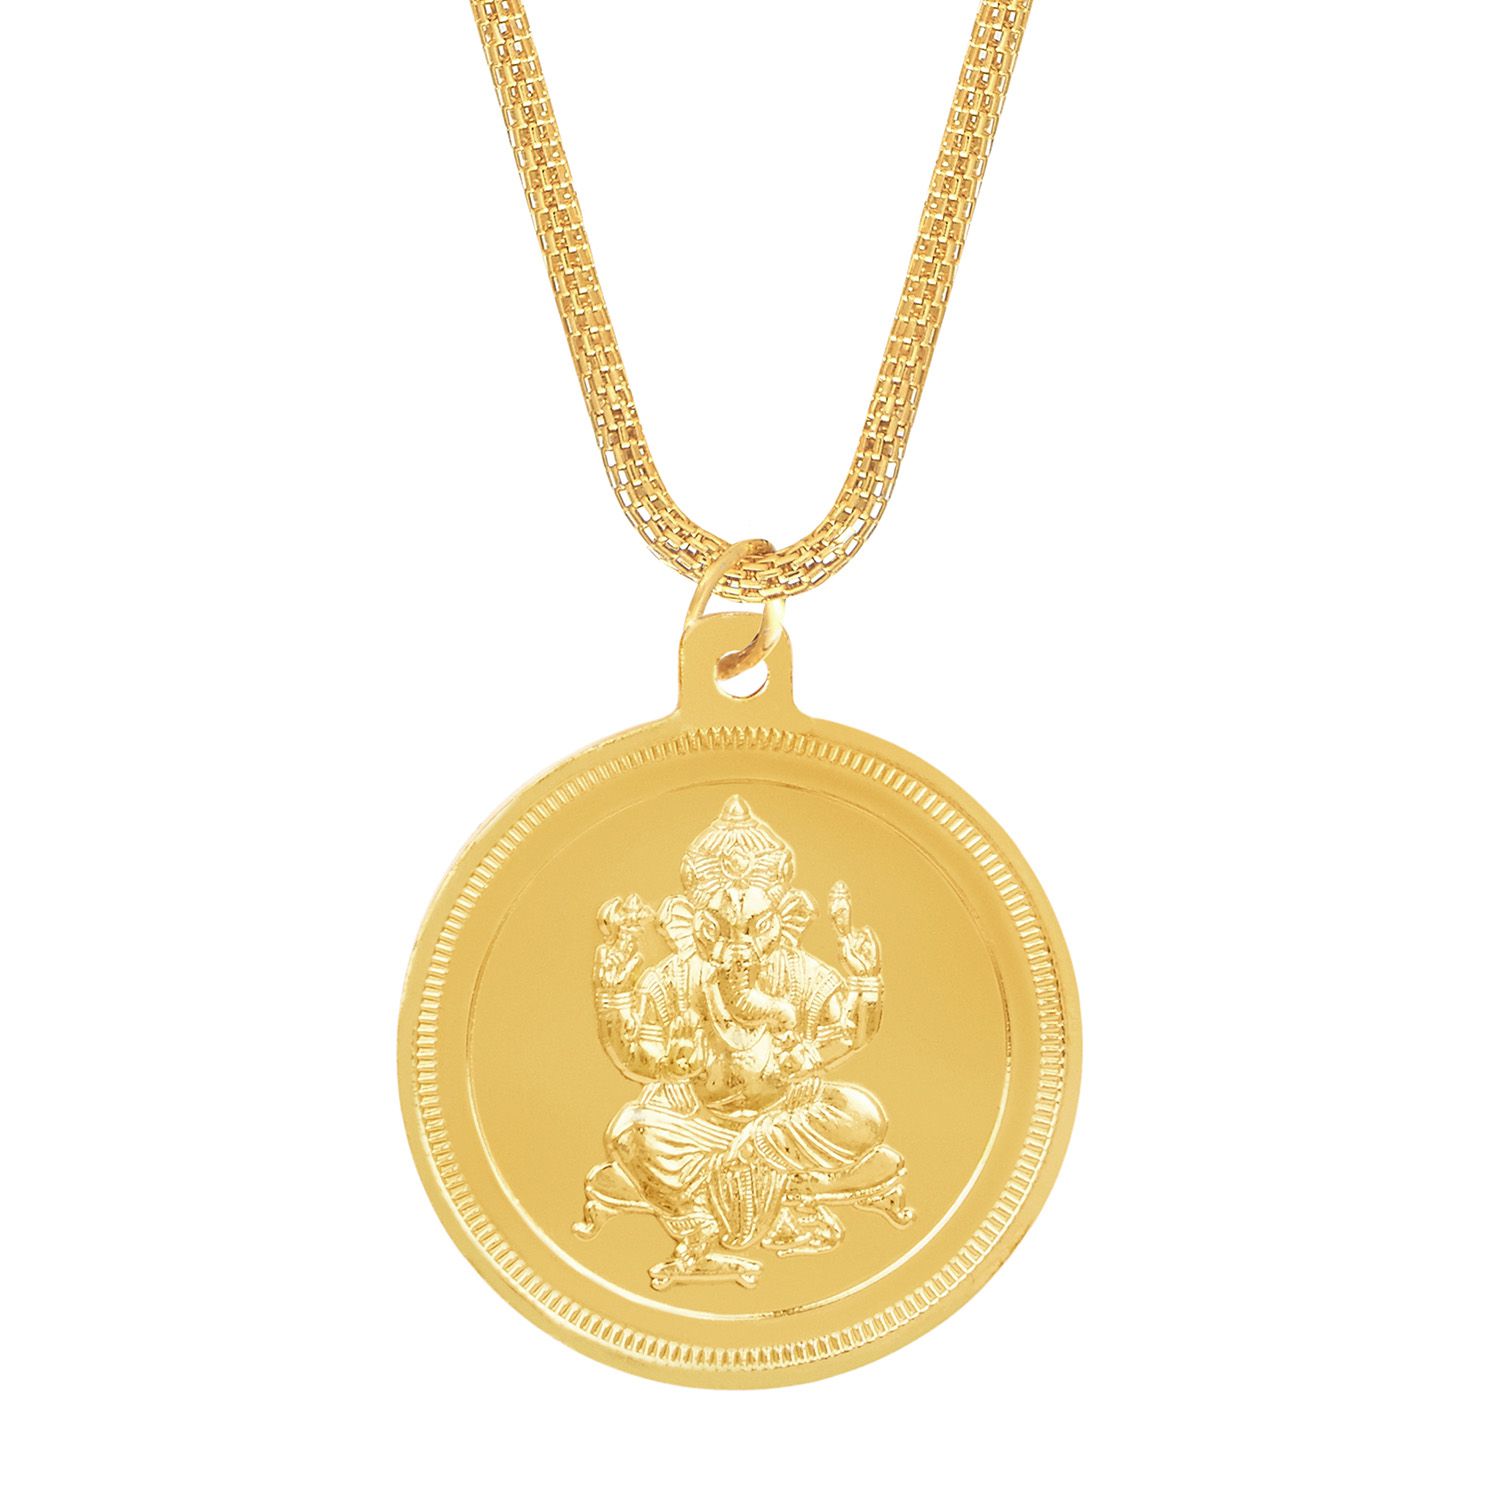 Shining Jewel 24K Gold Plated Ganesha Coin Pendant and Necklace (SJ ...